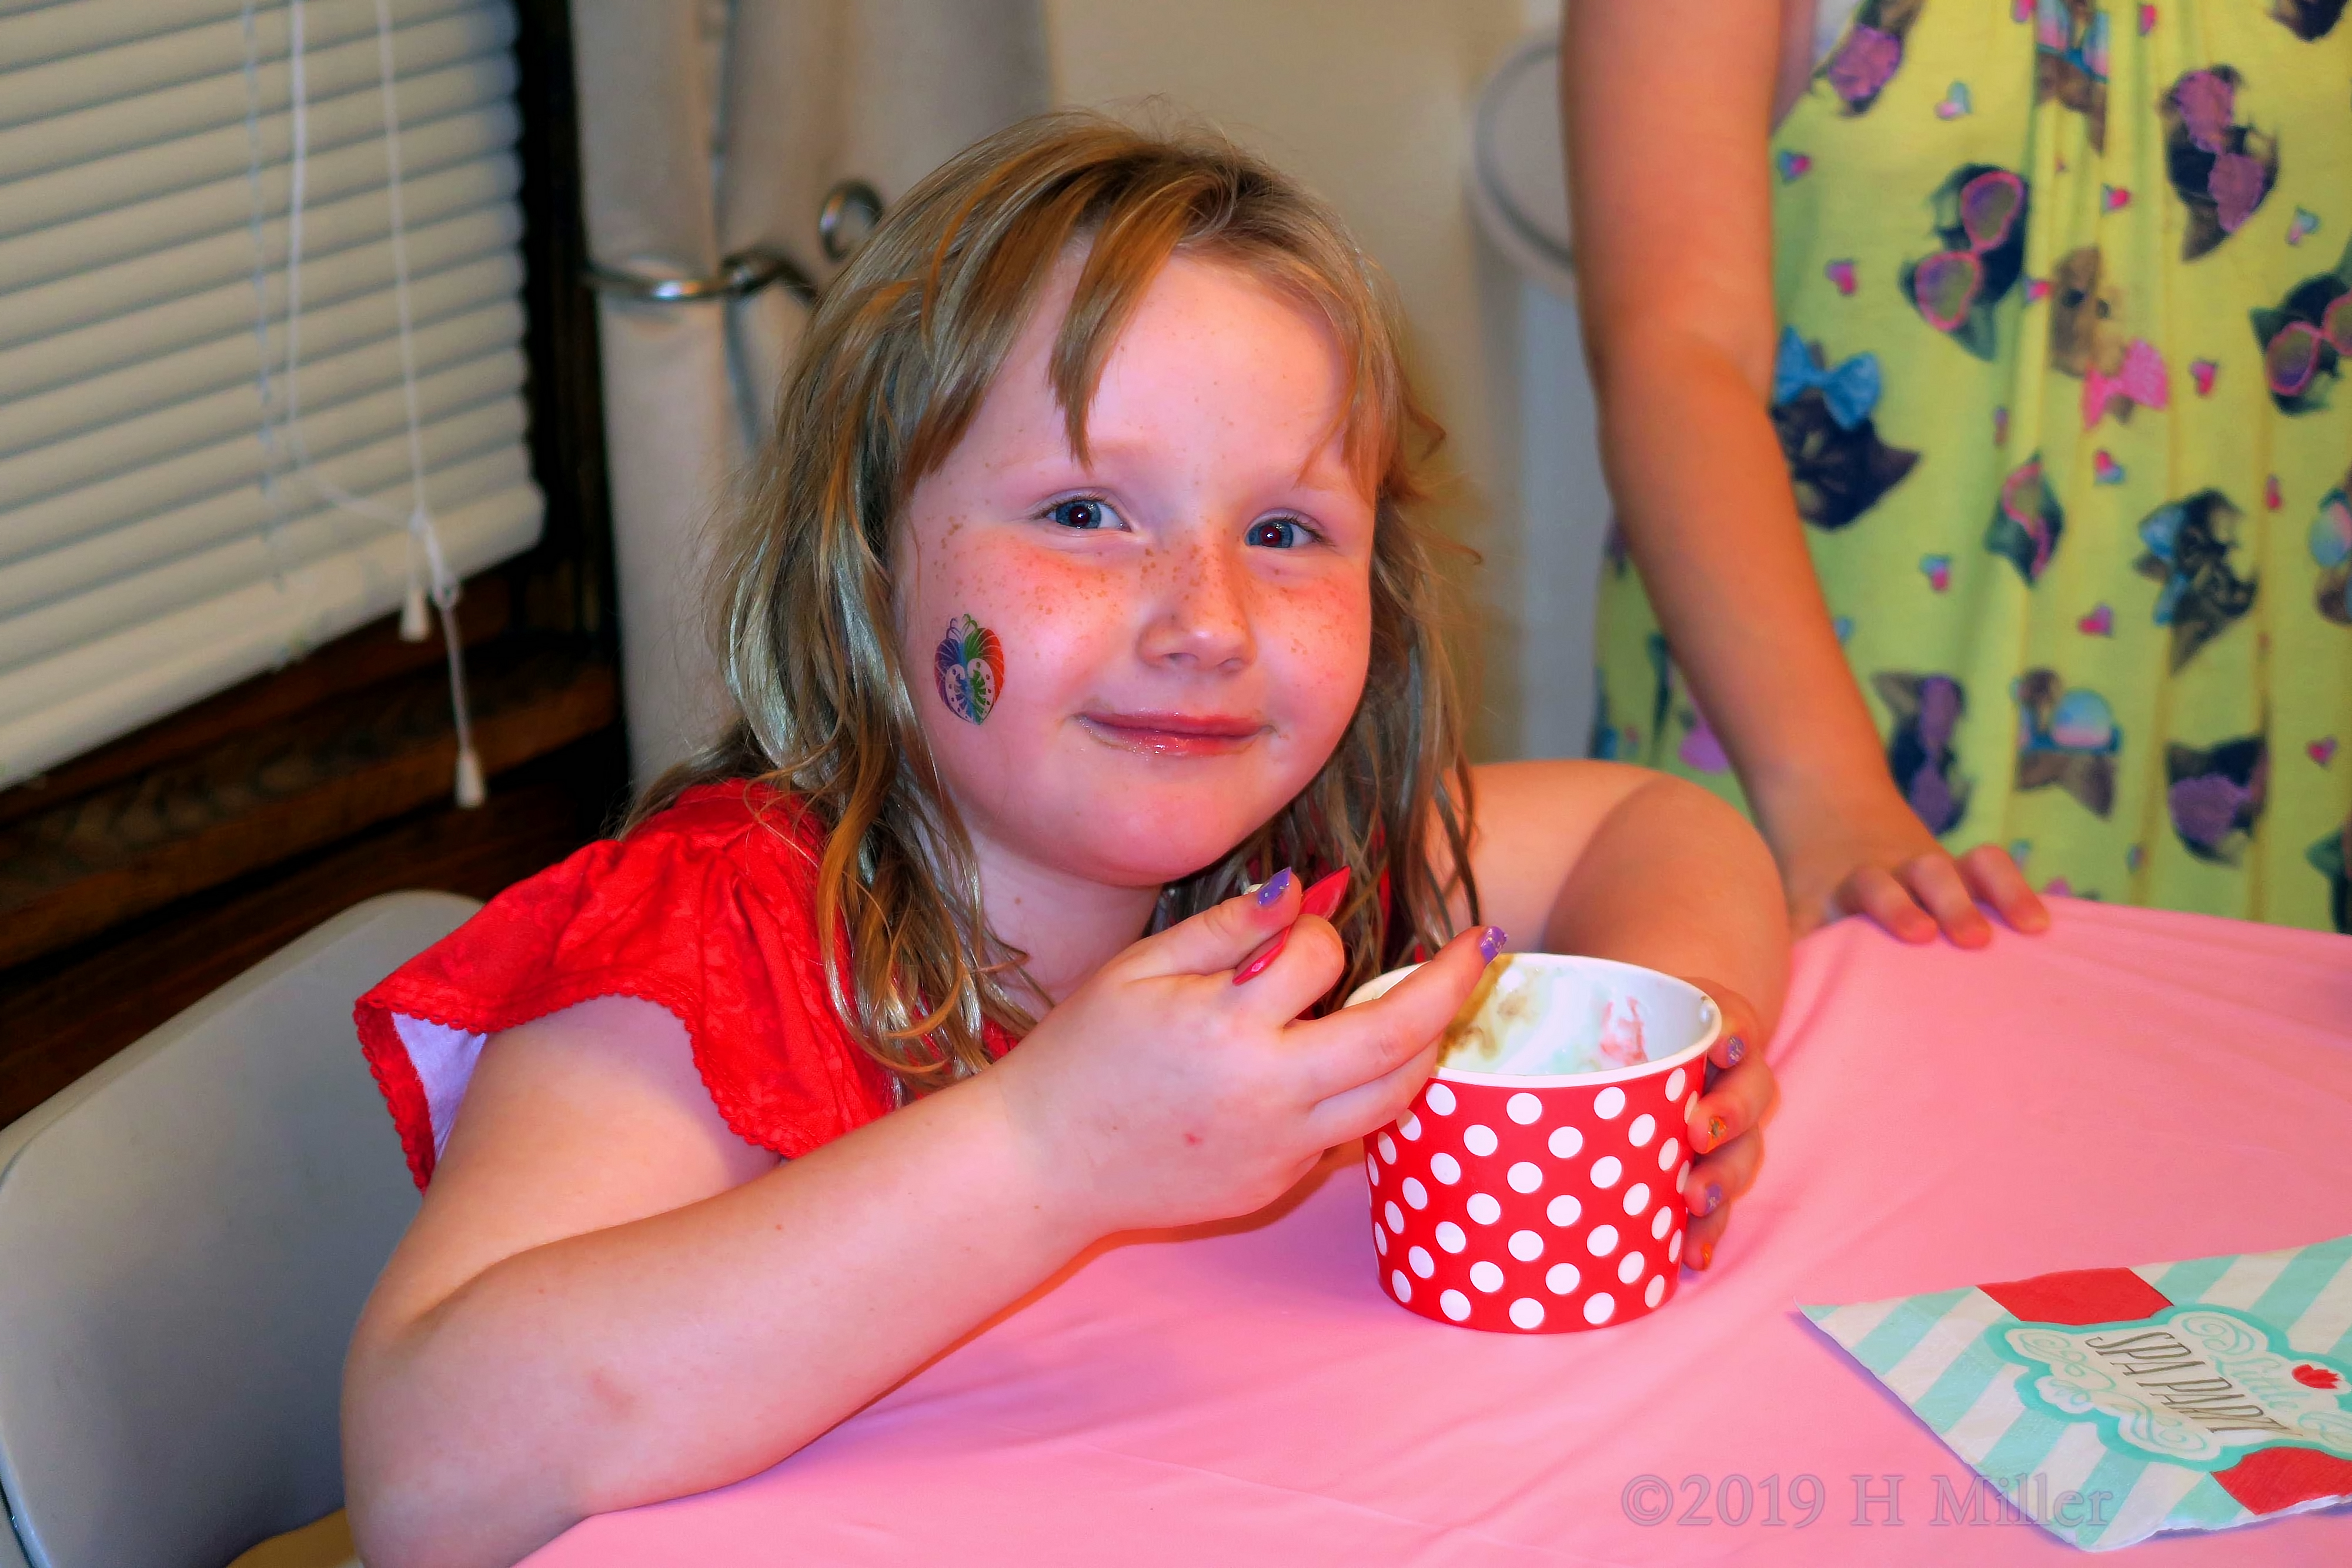 Scoops And Smiles! Dessert For Birthday Girl At The Girls Party! 4